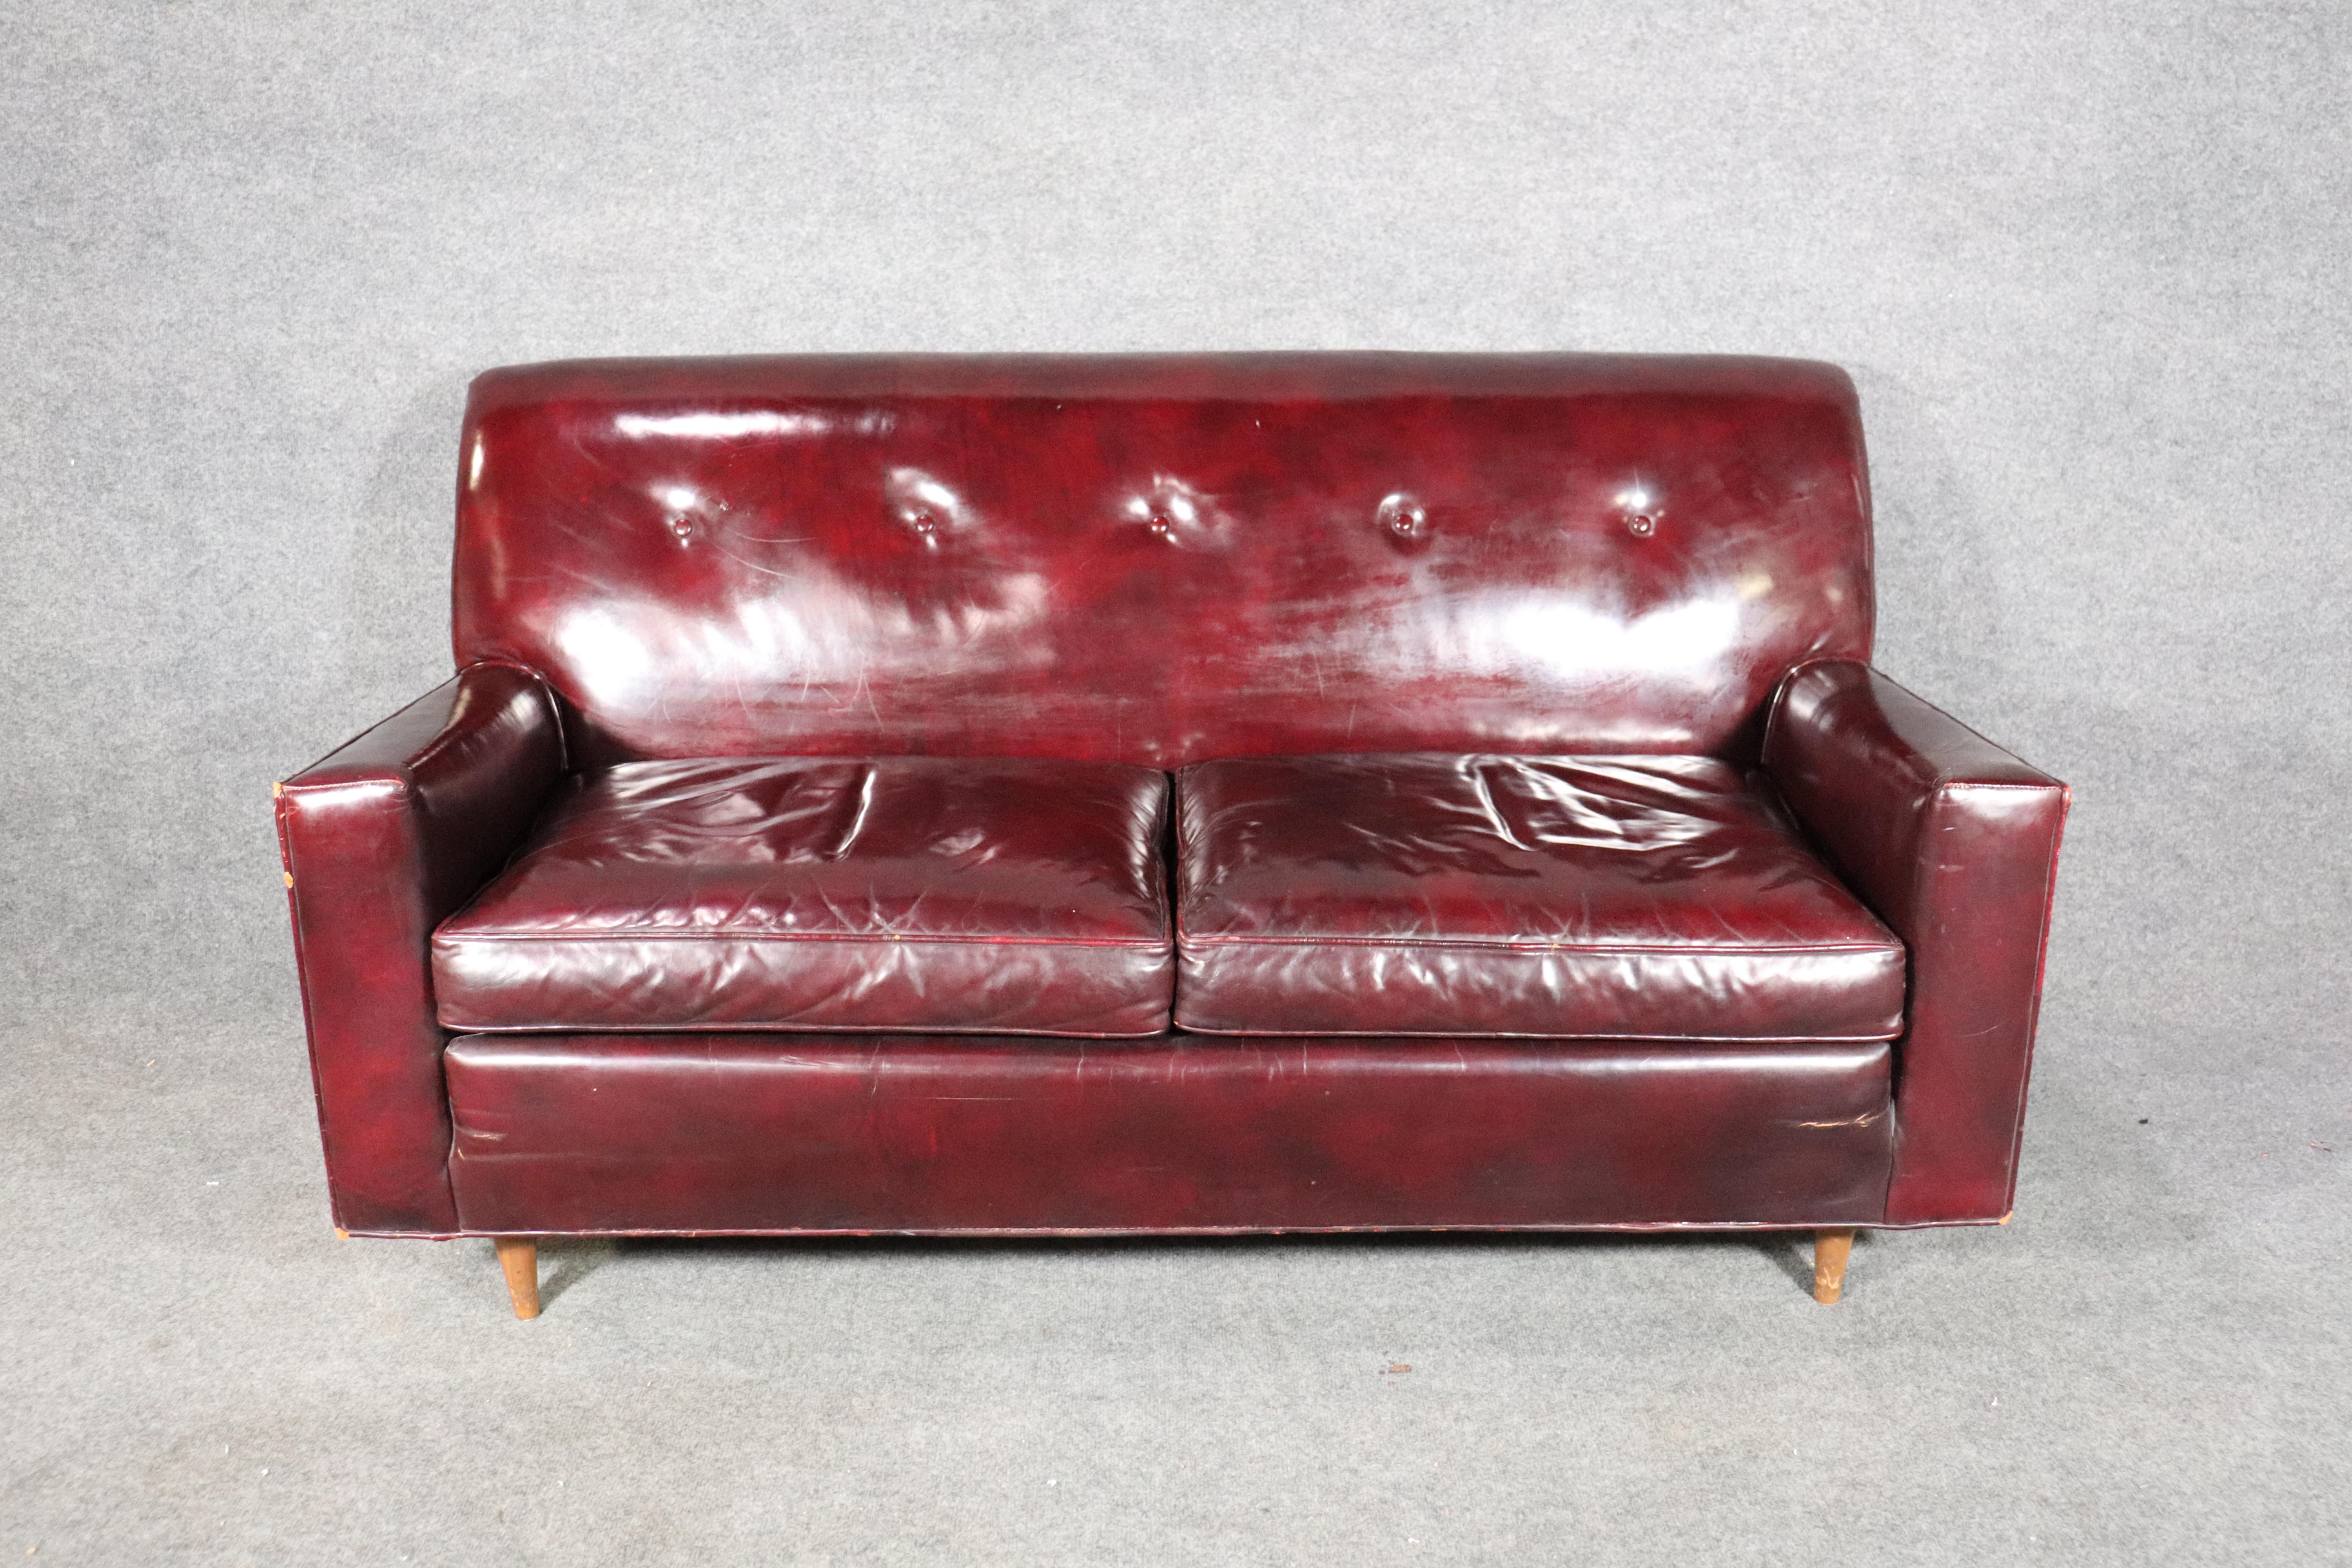 Well worn burgundy leather sofa with tufted back and tapered wood legs.
Please confirm location.